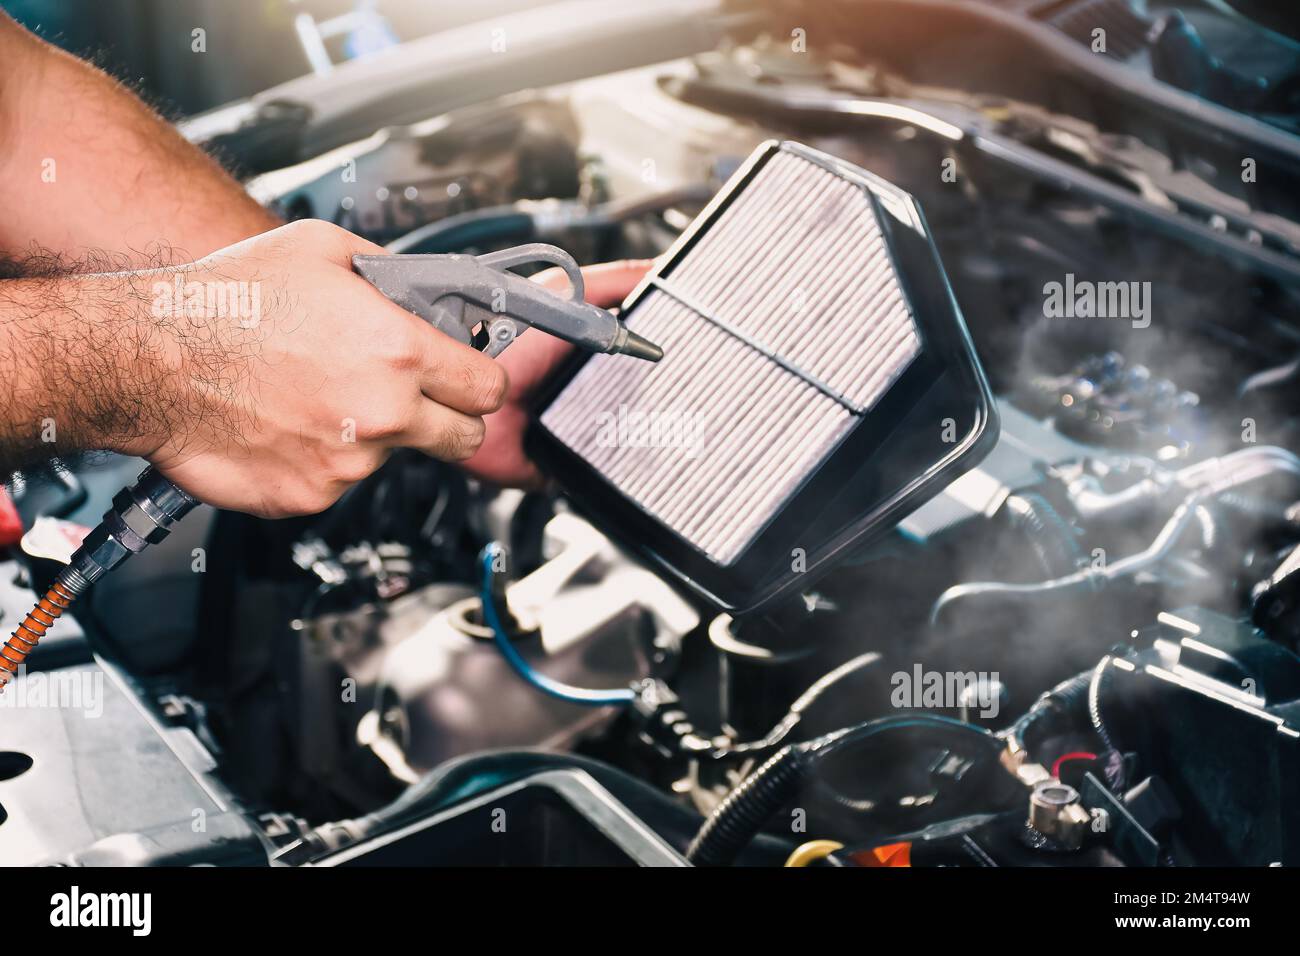 Auto mechanic is blowing dust and cleaning a car air filter with air blow gun, car maintenance service concept Stock Photo